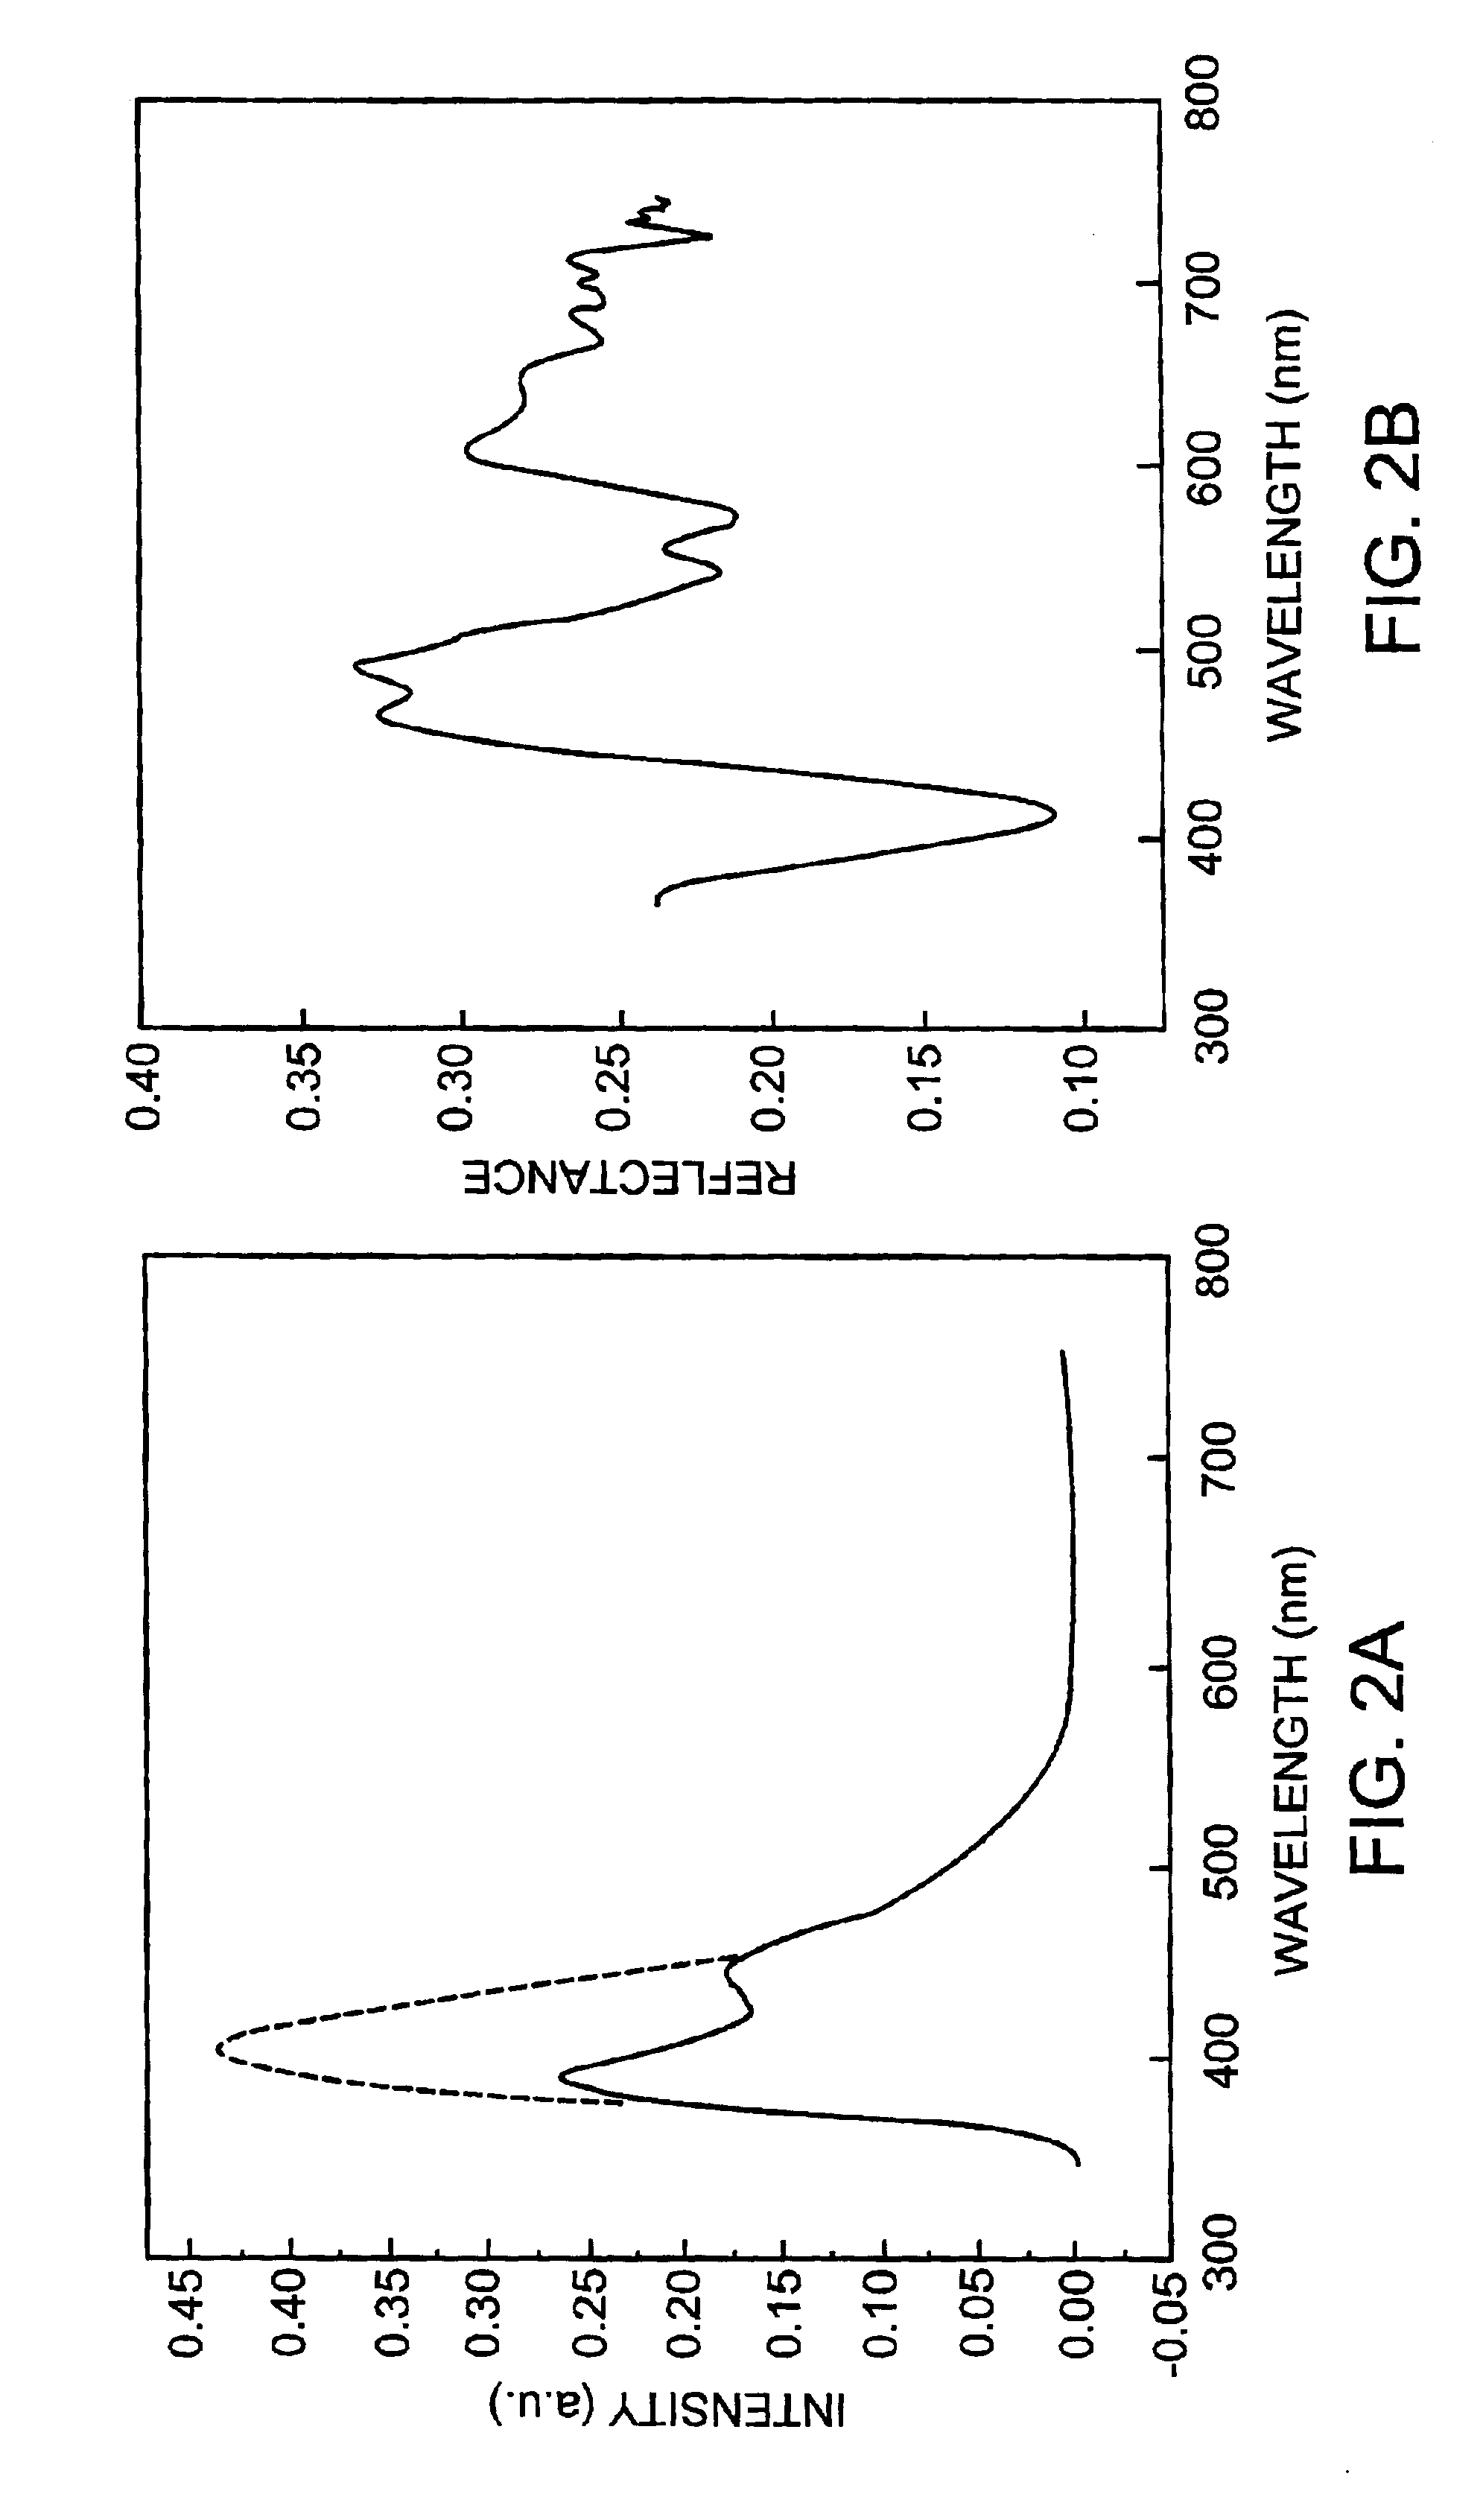 System and methods of fluorescence, reflectance and light scattering spectroscopy for measuring tissue characteristics